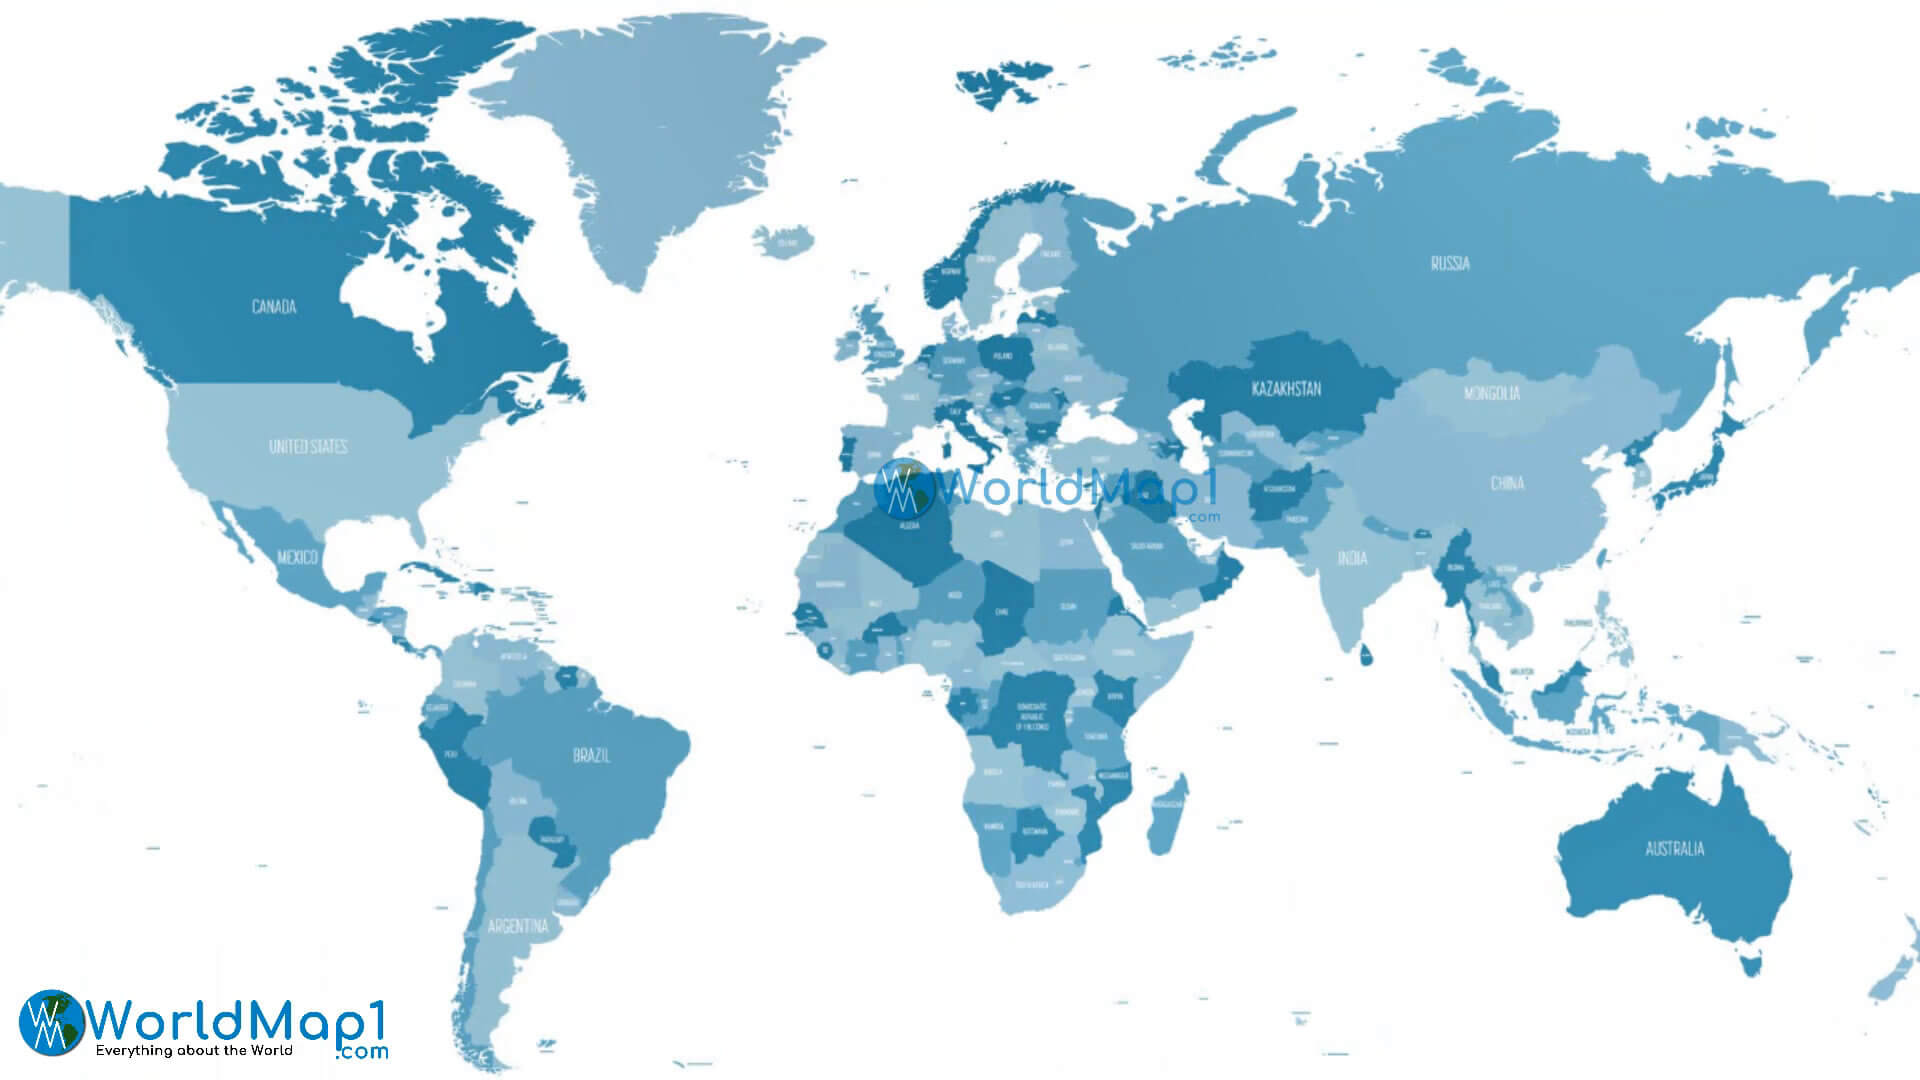 Clickable Map of World Countries